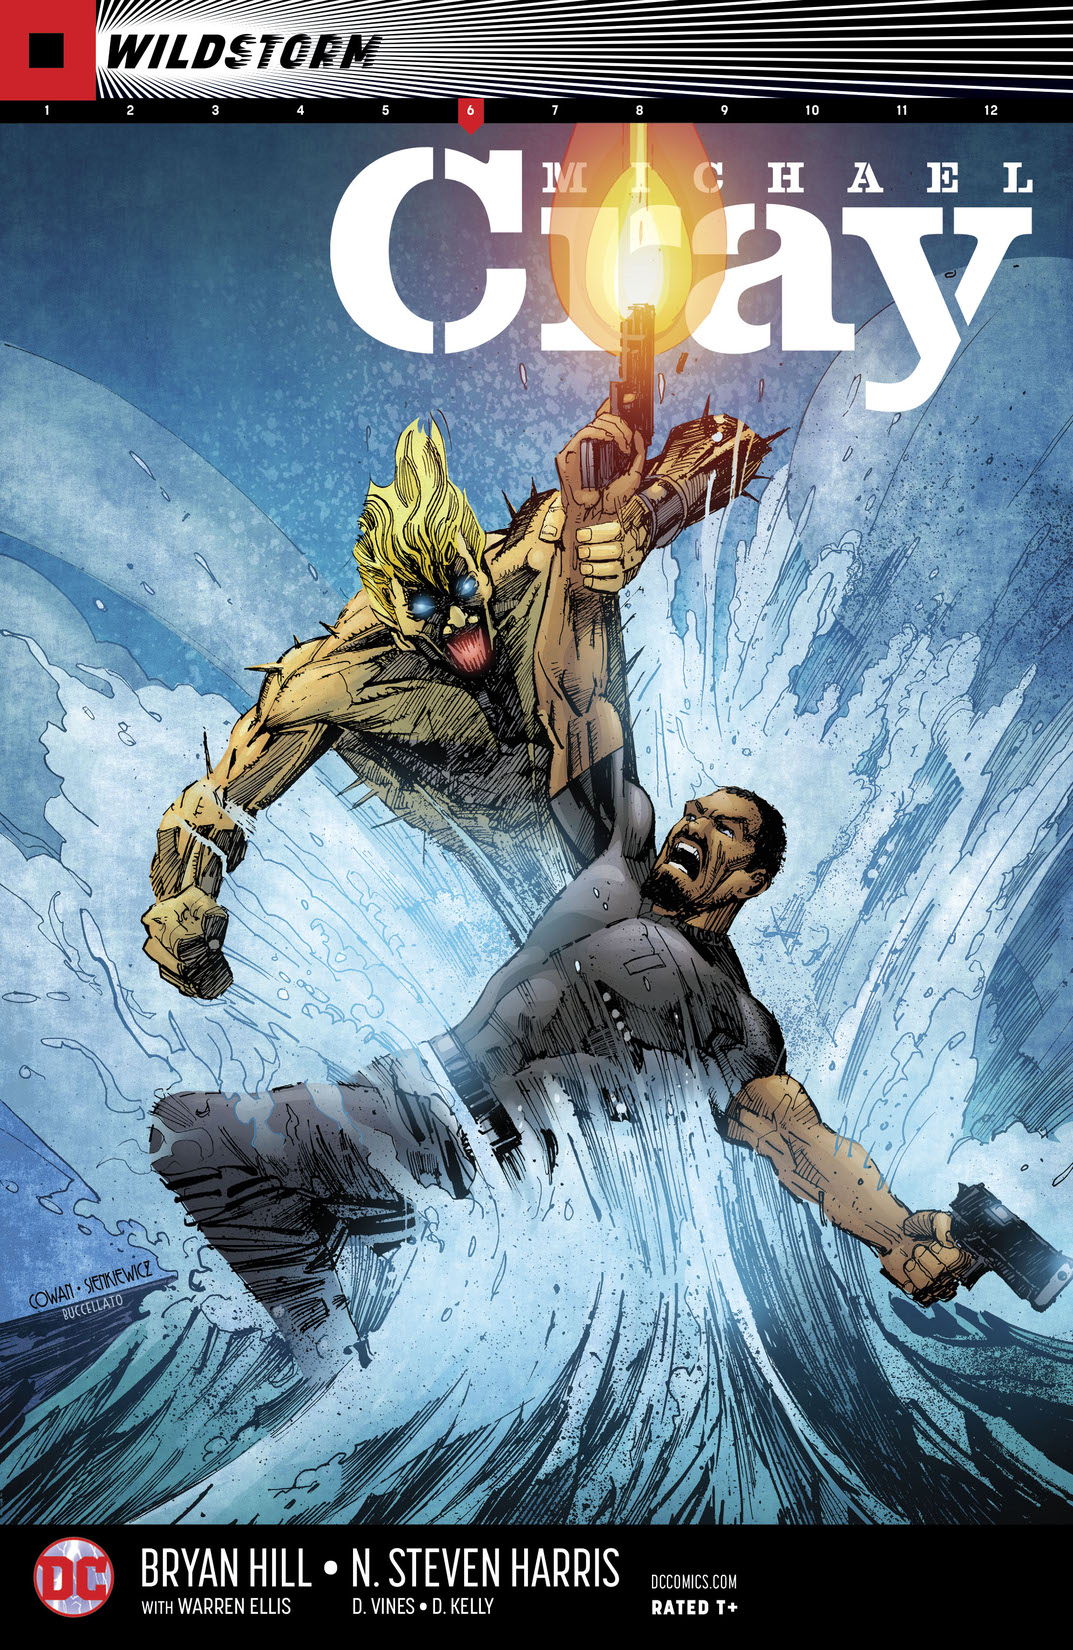 The Wild Storm: Michael Cray #6 preview images